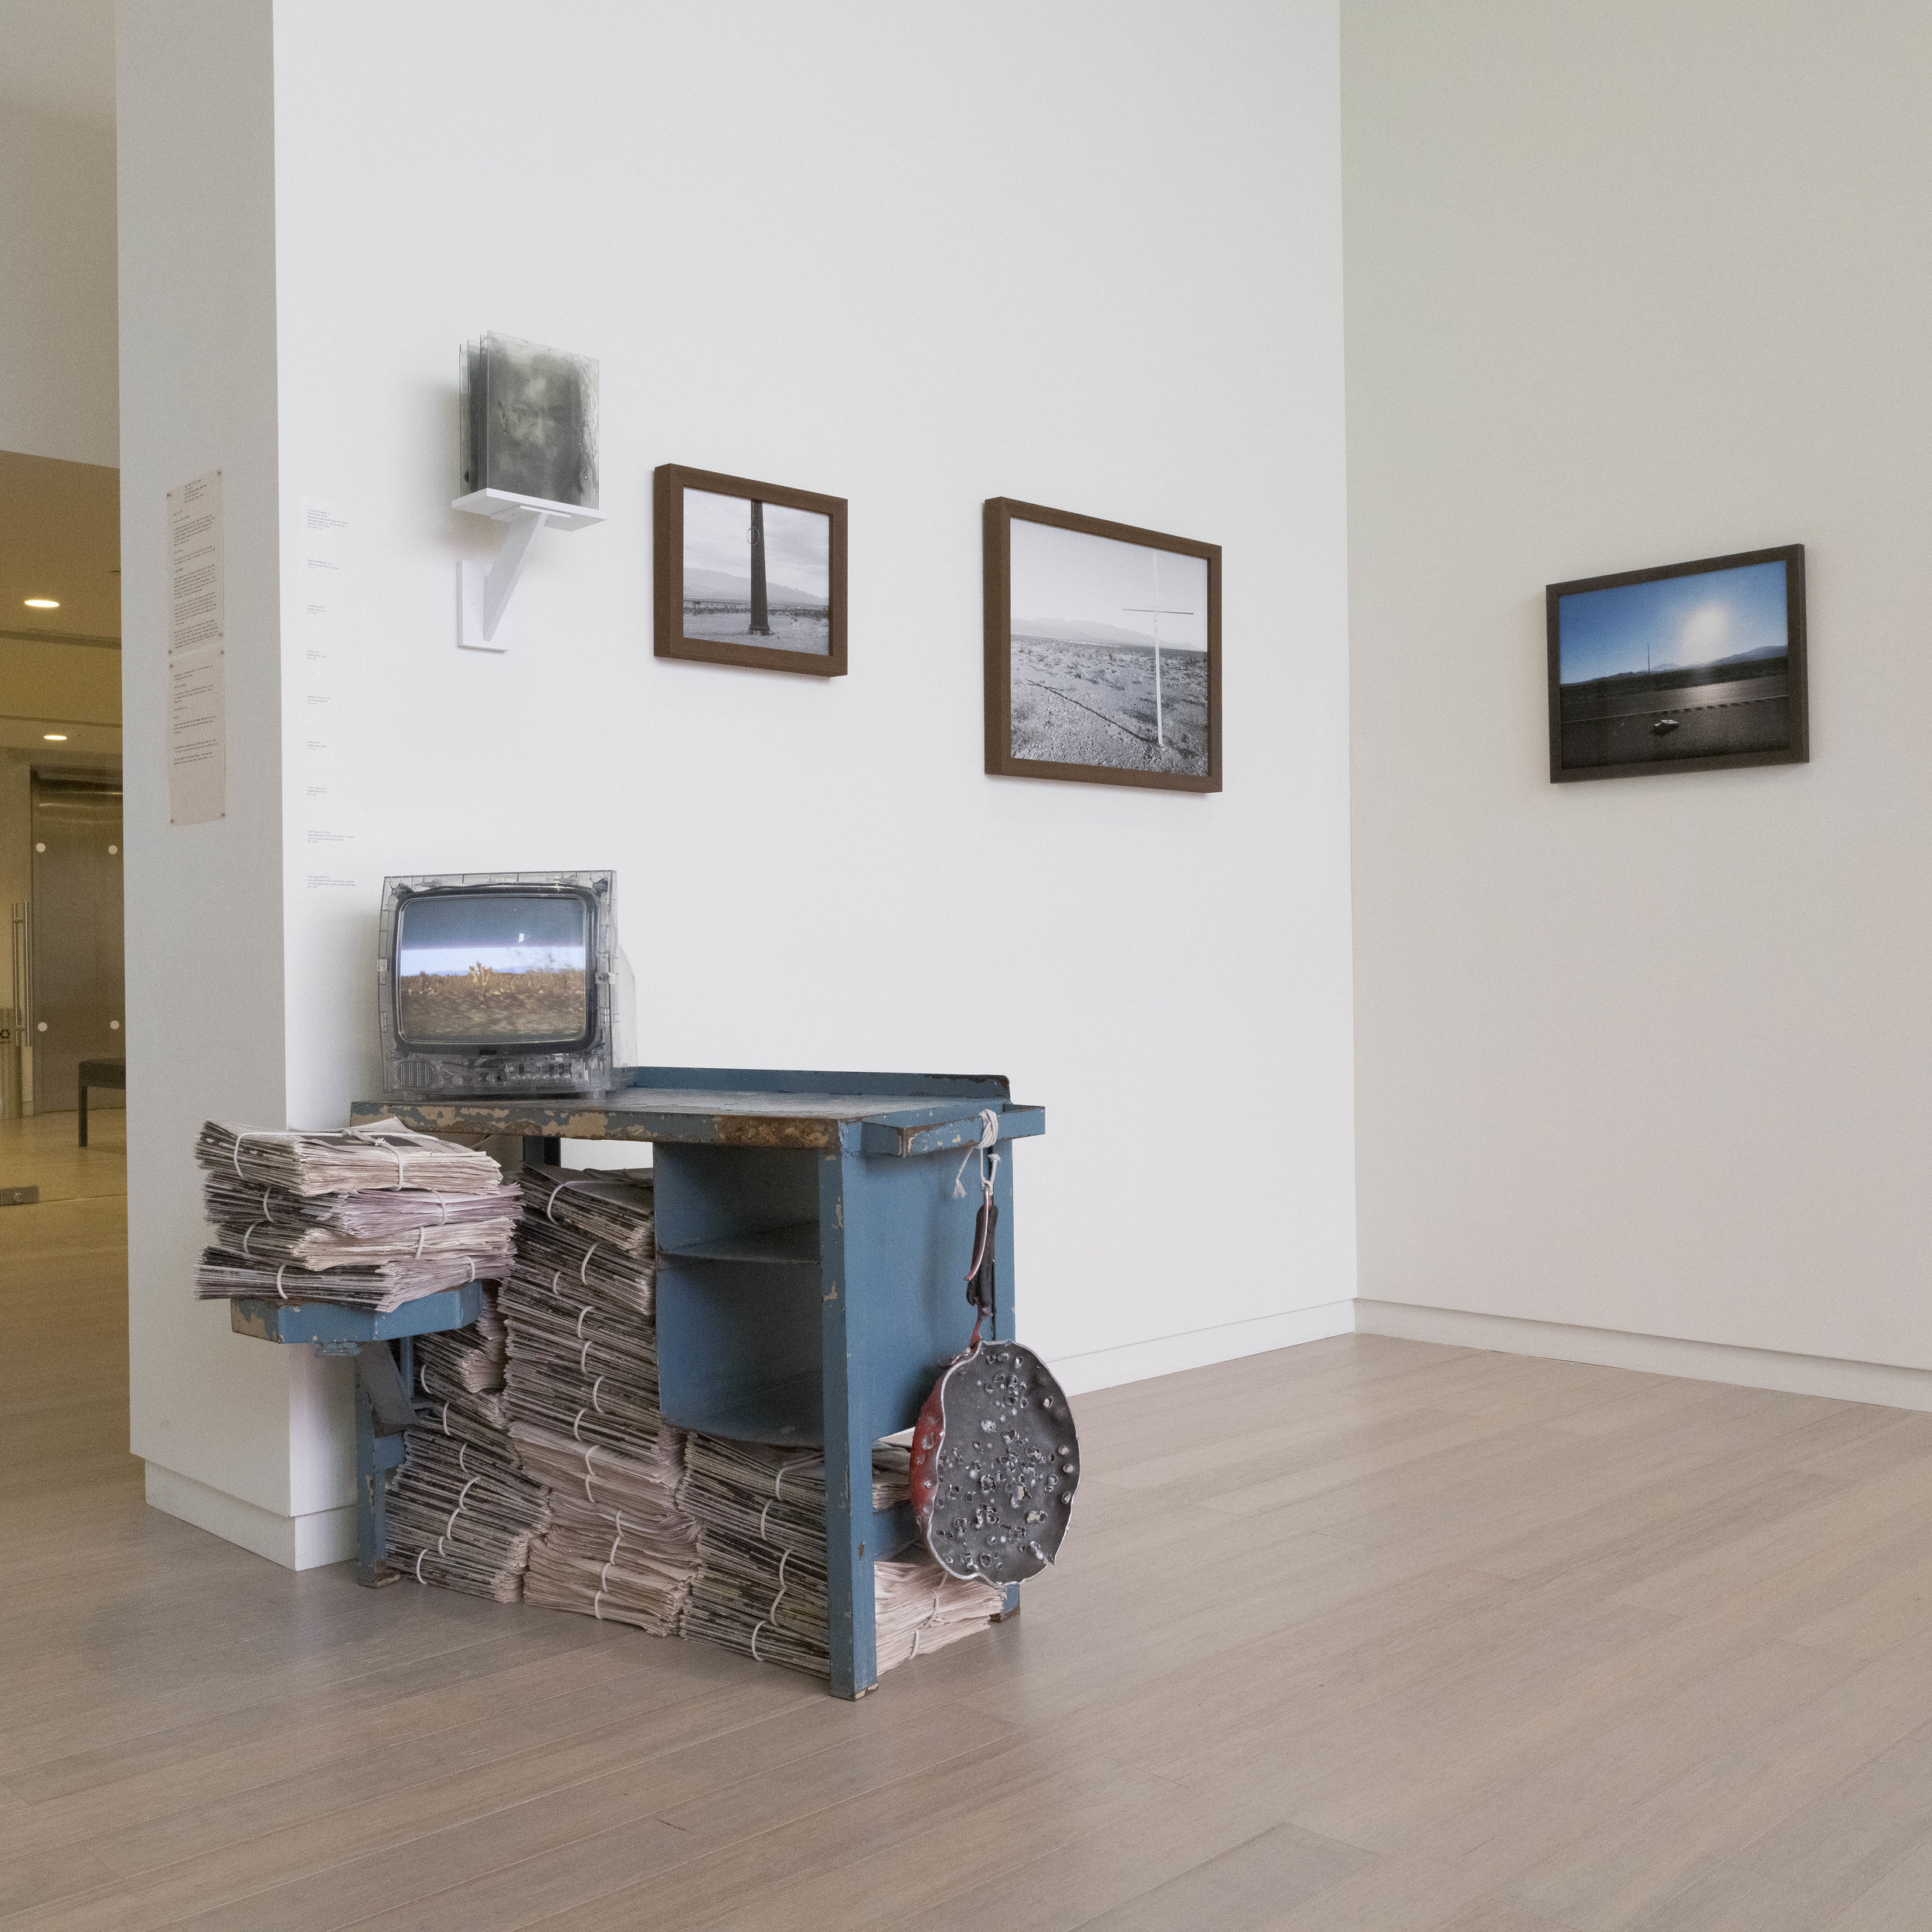  Installation at Wallach Gallery - Lenfest Center of the Arts, New York, New York, 2019 